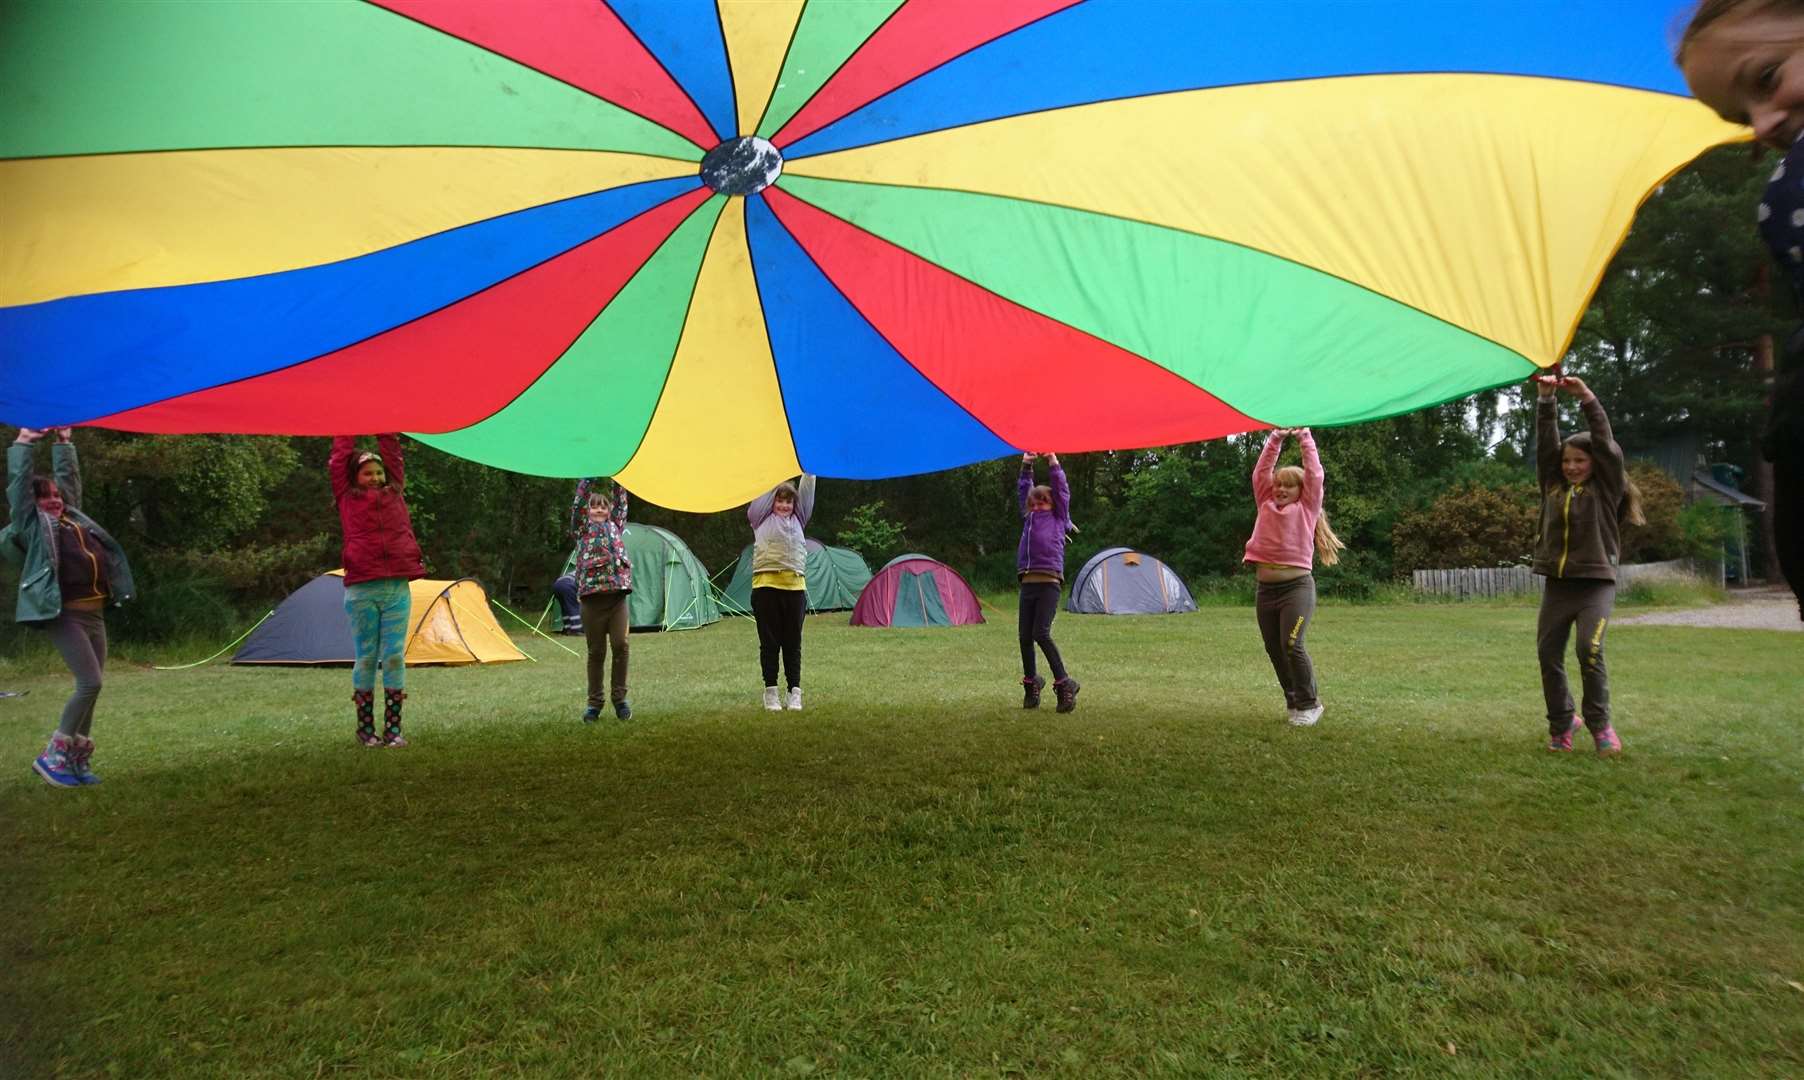 1st Cullen and 2nd Fochabers Brownies enjoy playing with the parachute.